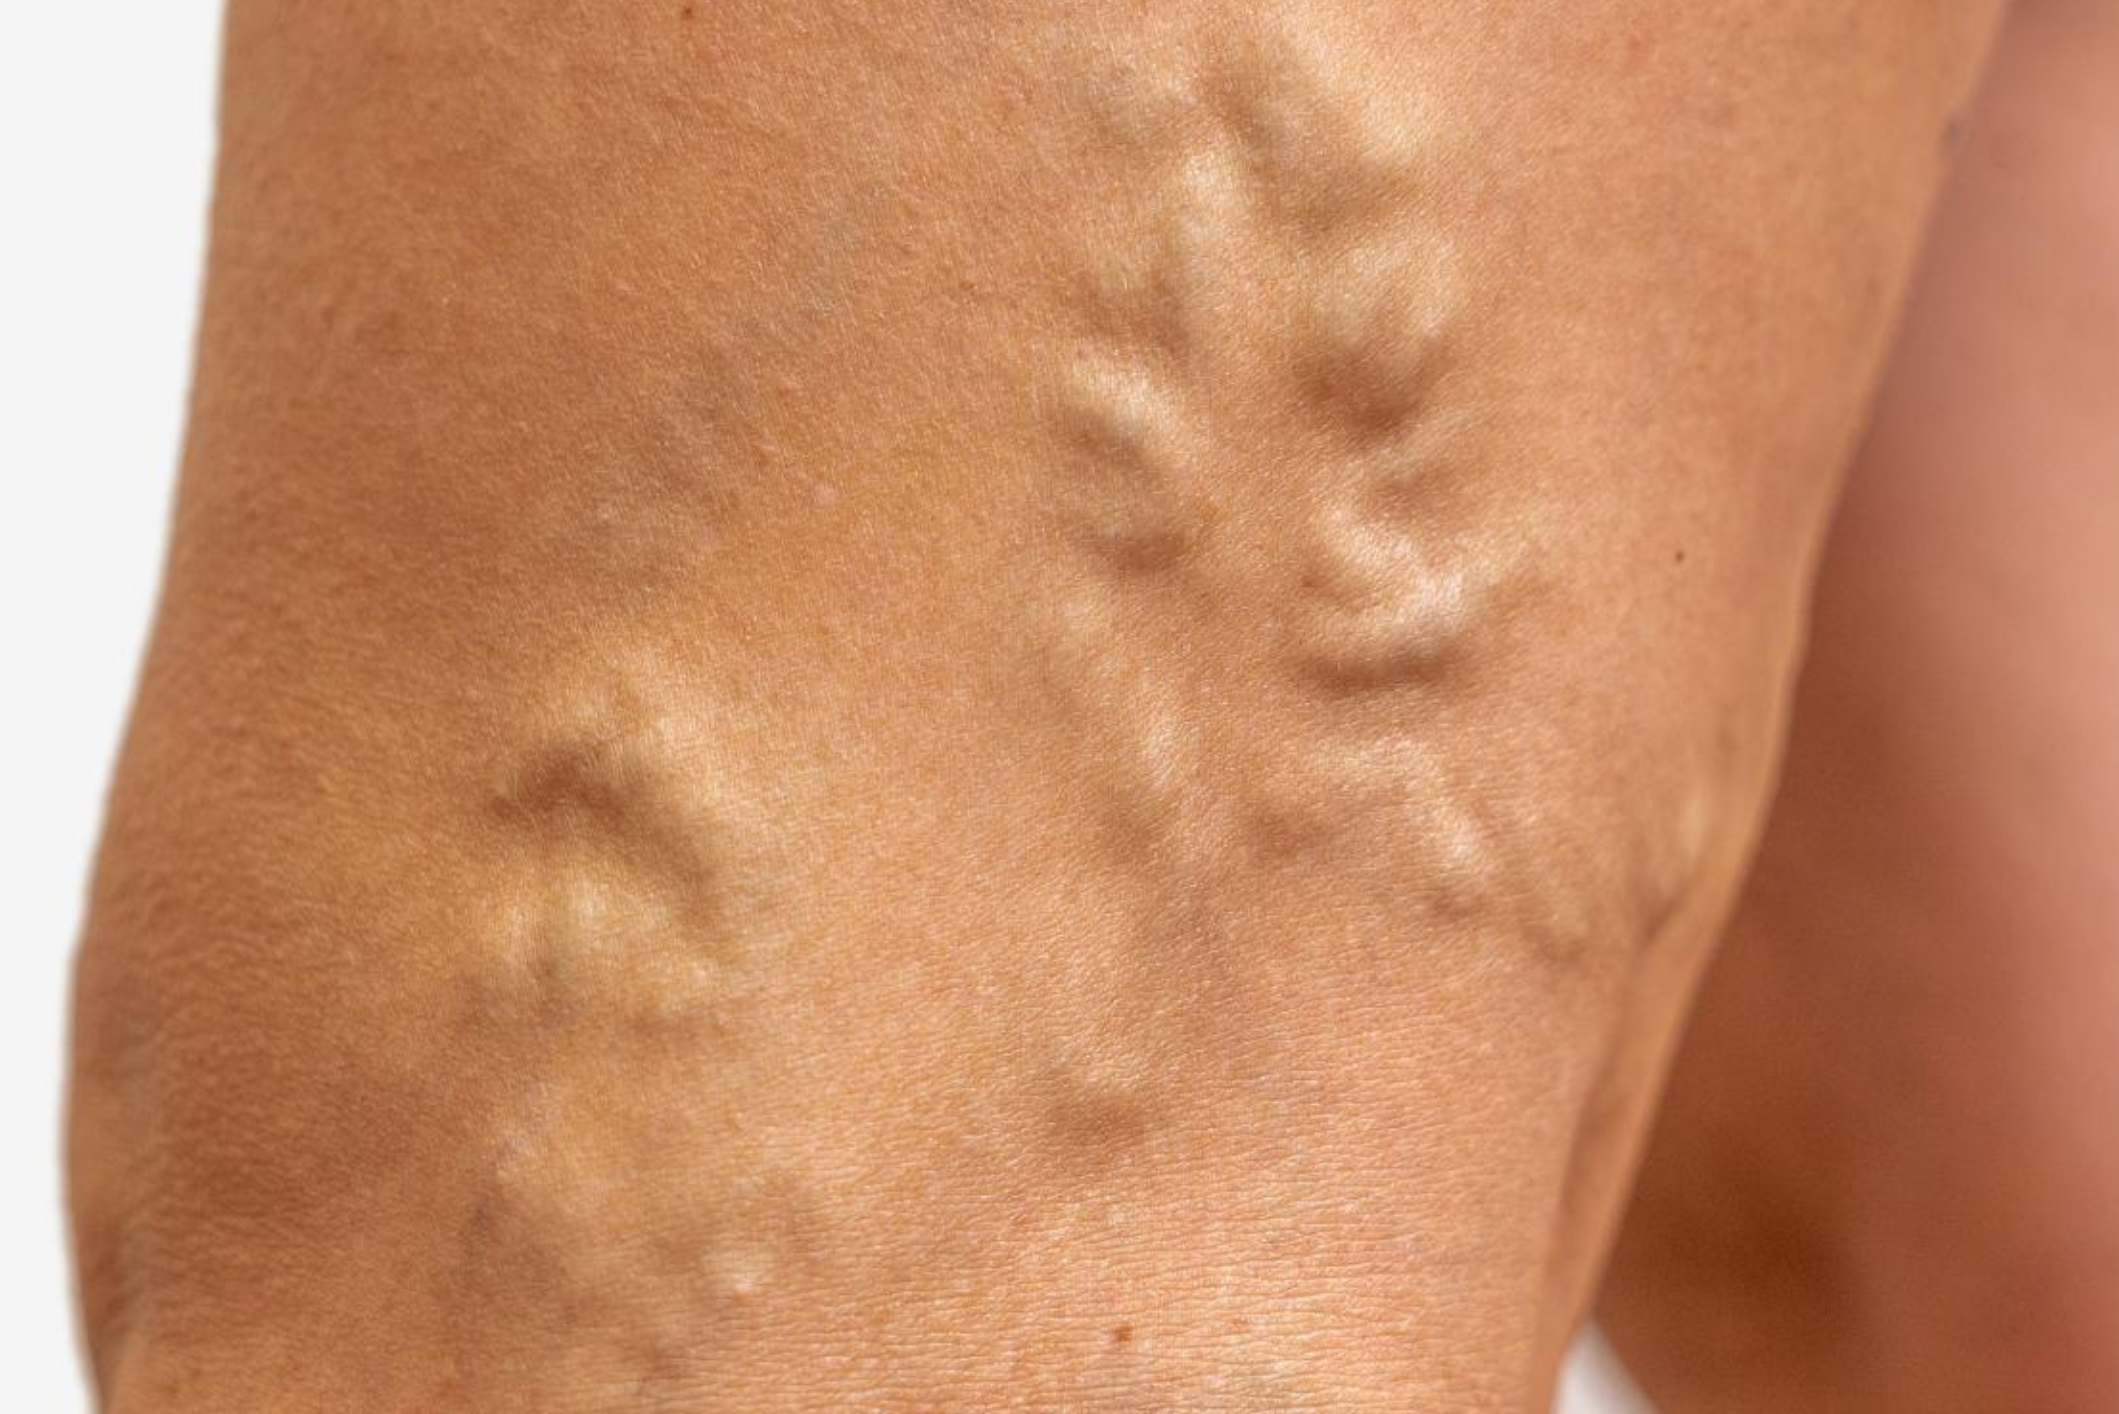 Varicose veins – causes and problems